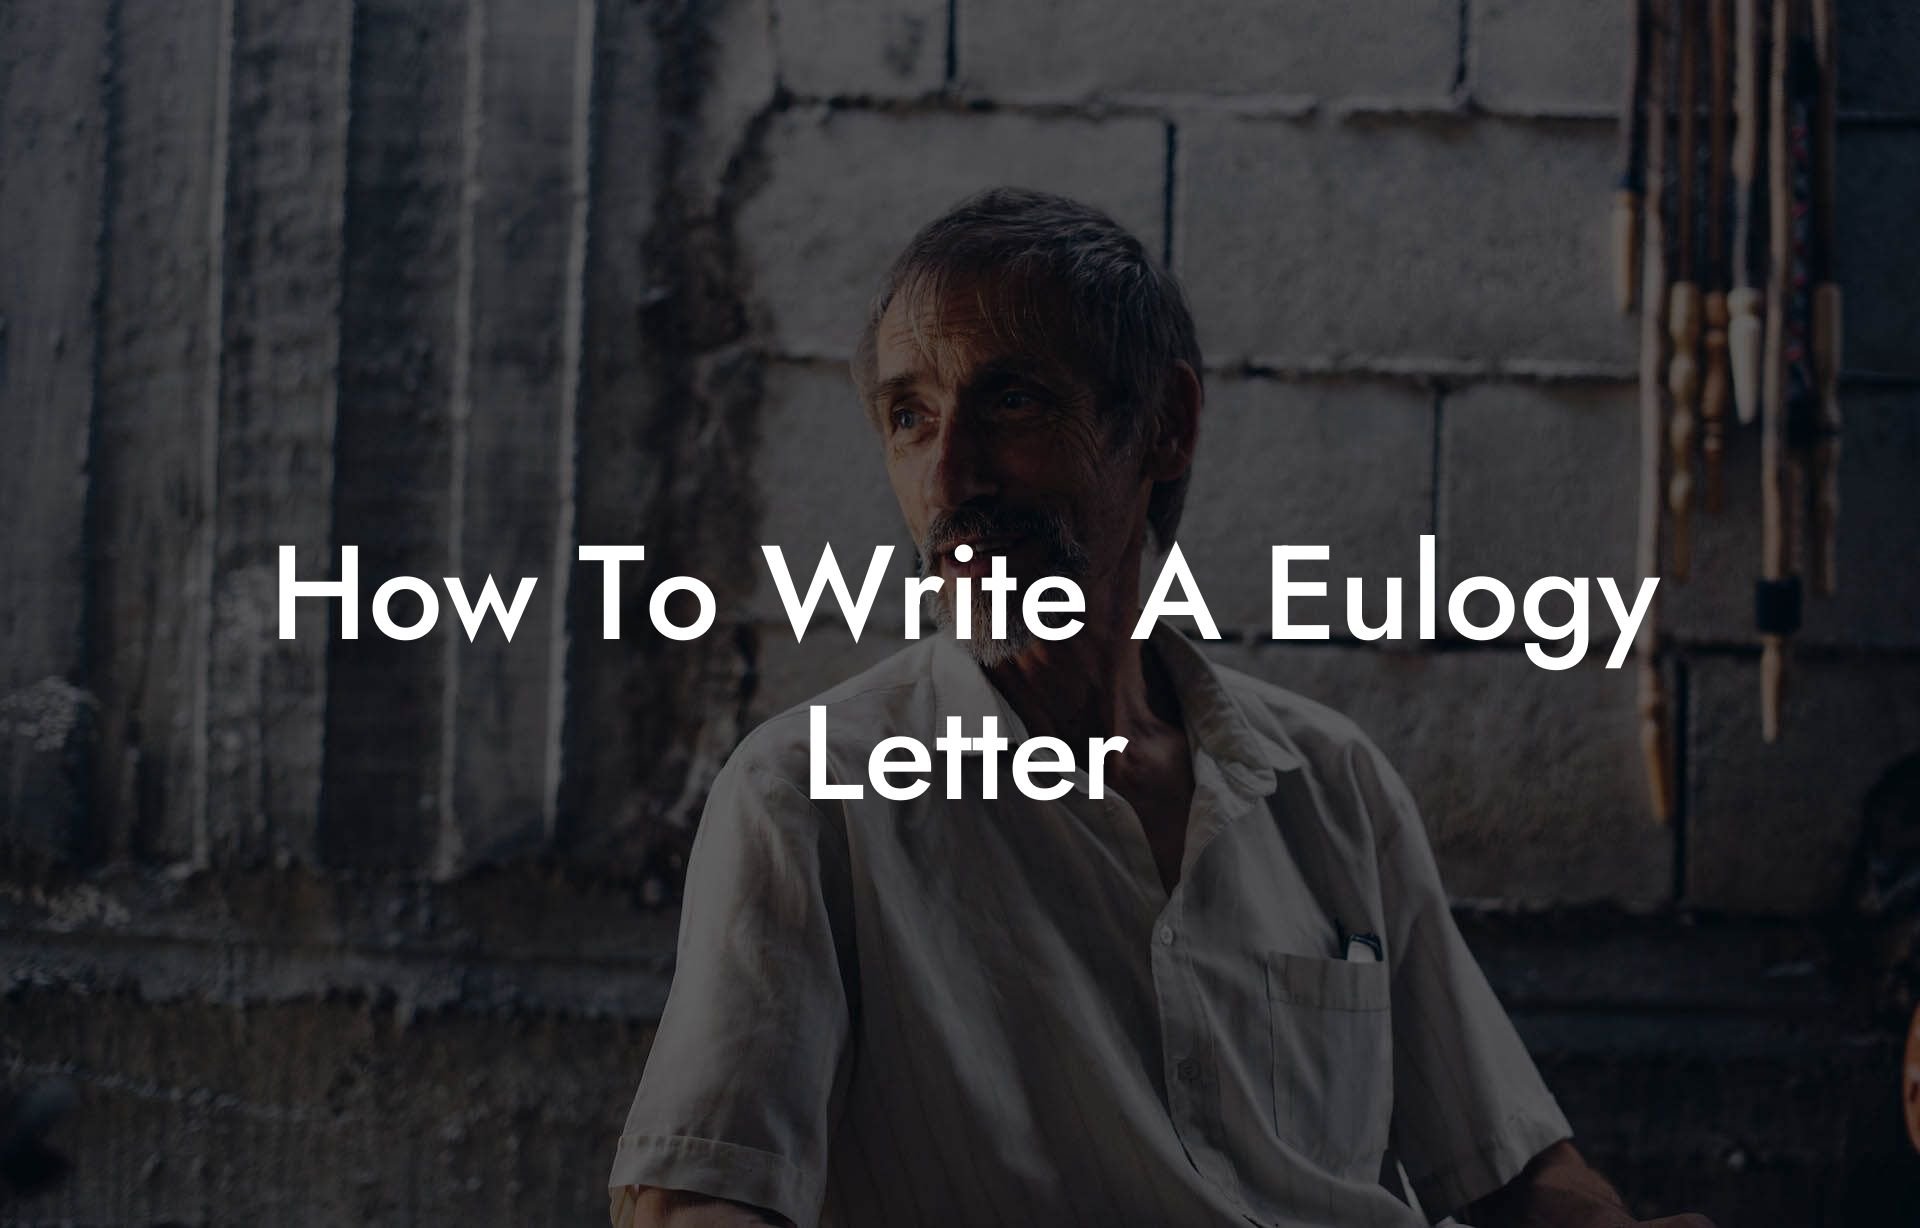 How To Write A Eulogy Letter